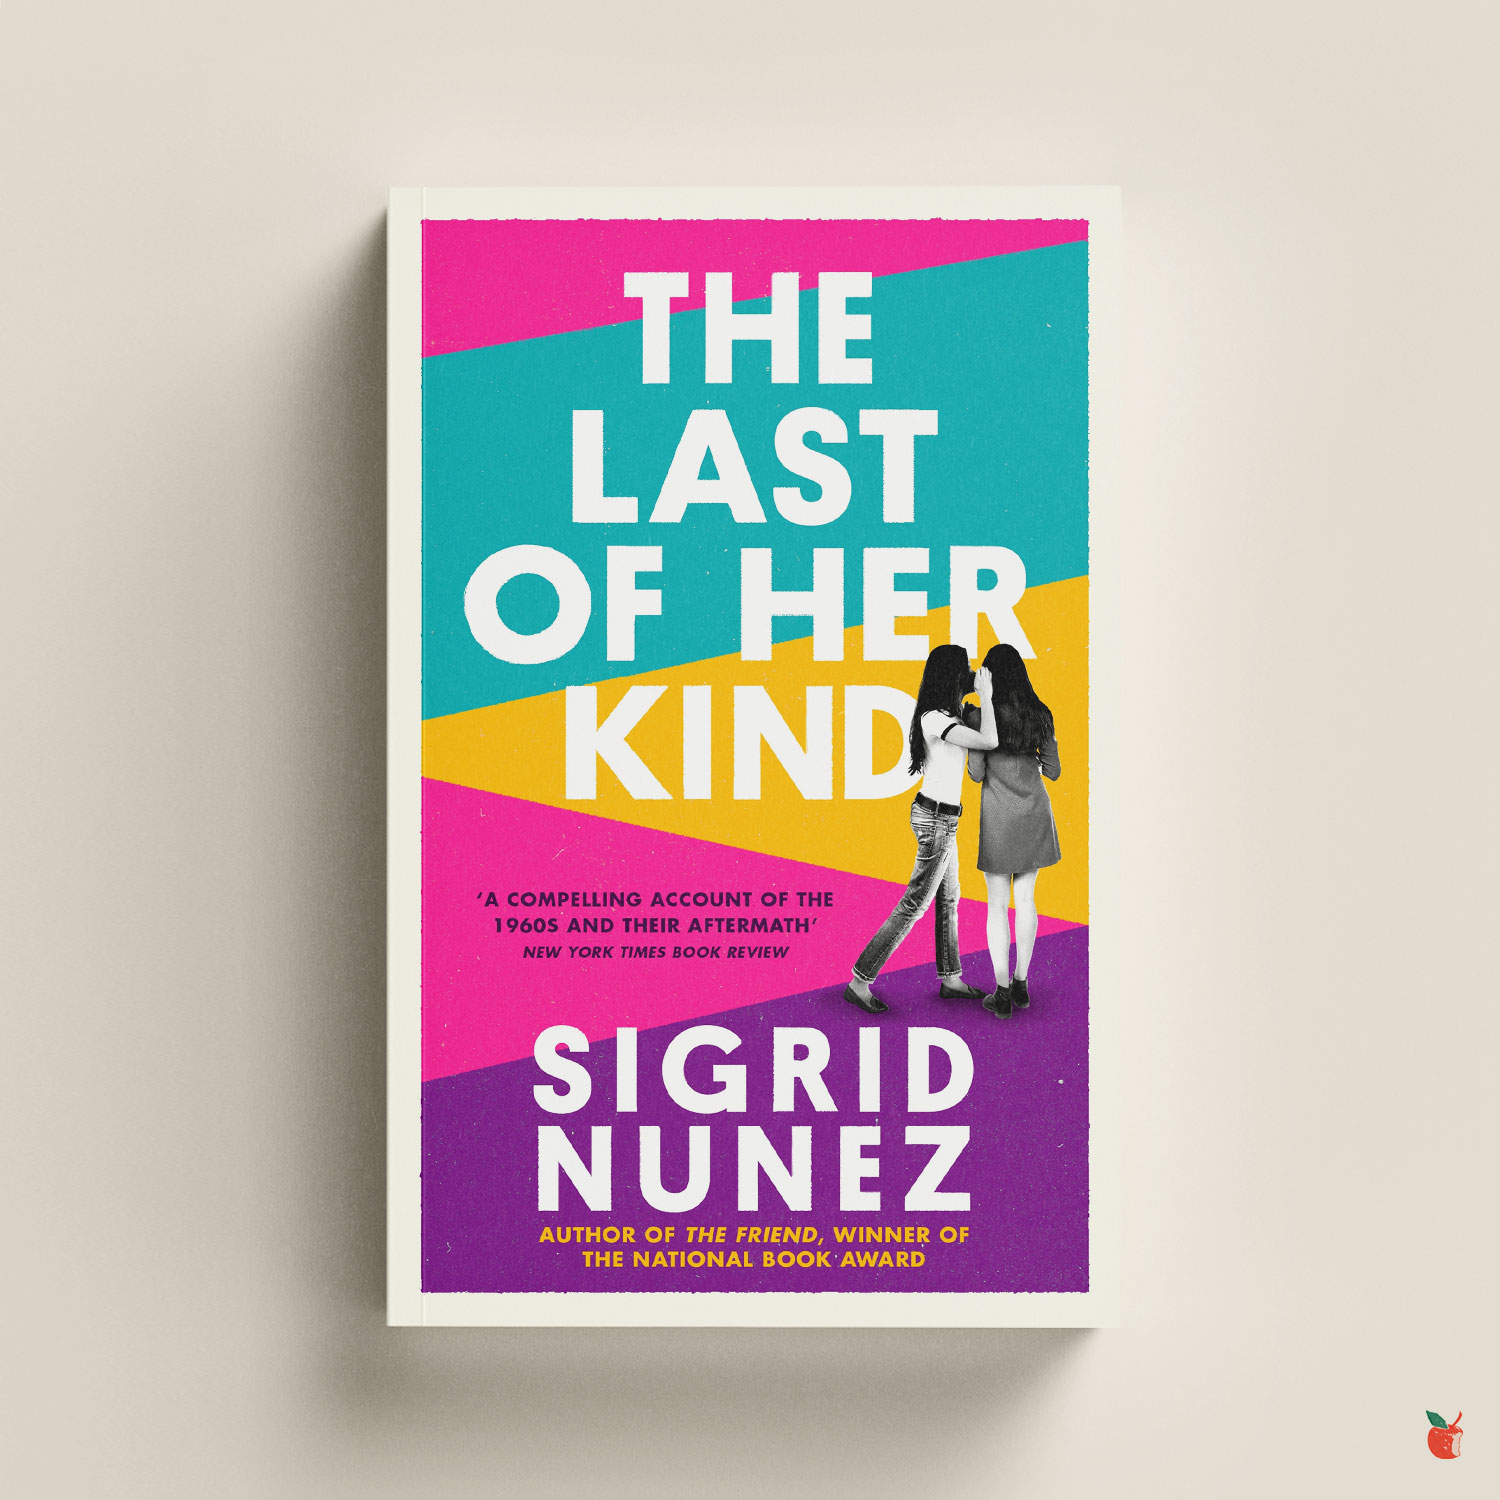 The Last of Her Kind by Sigrid Nunez